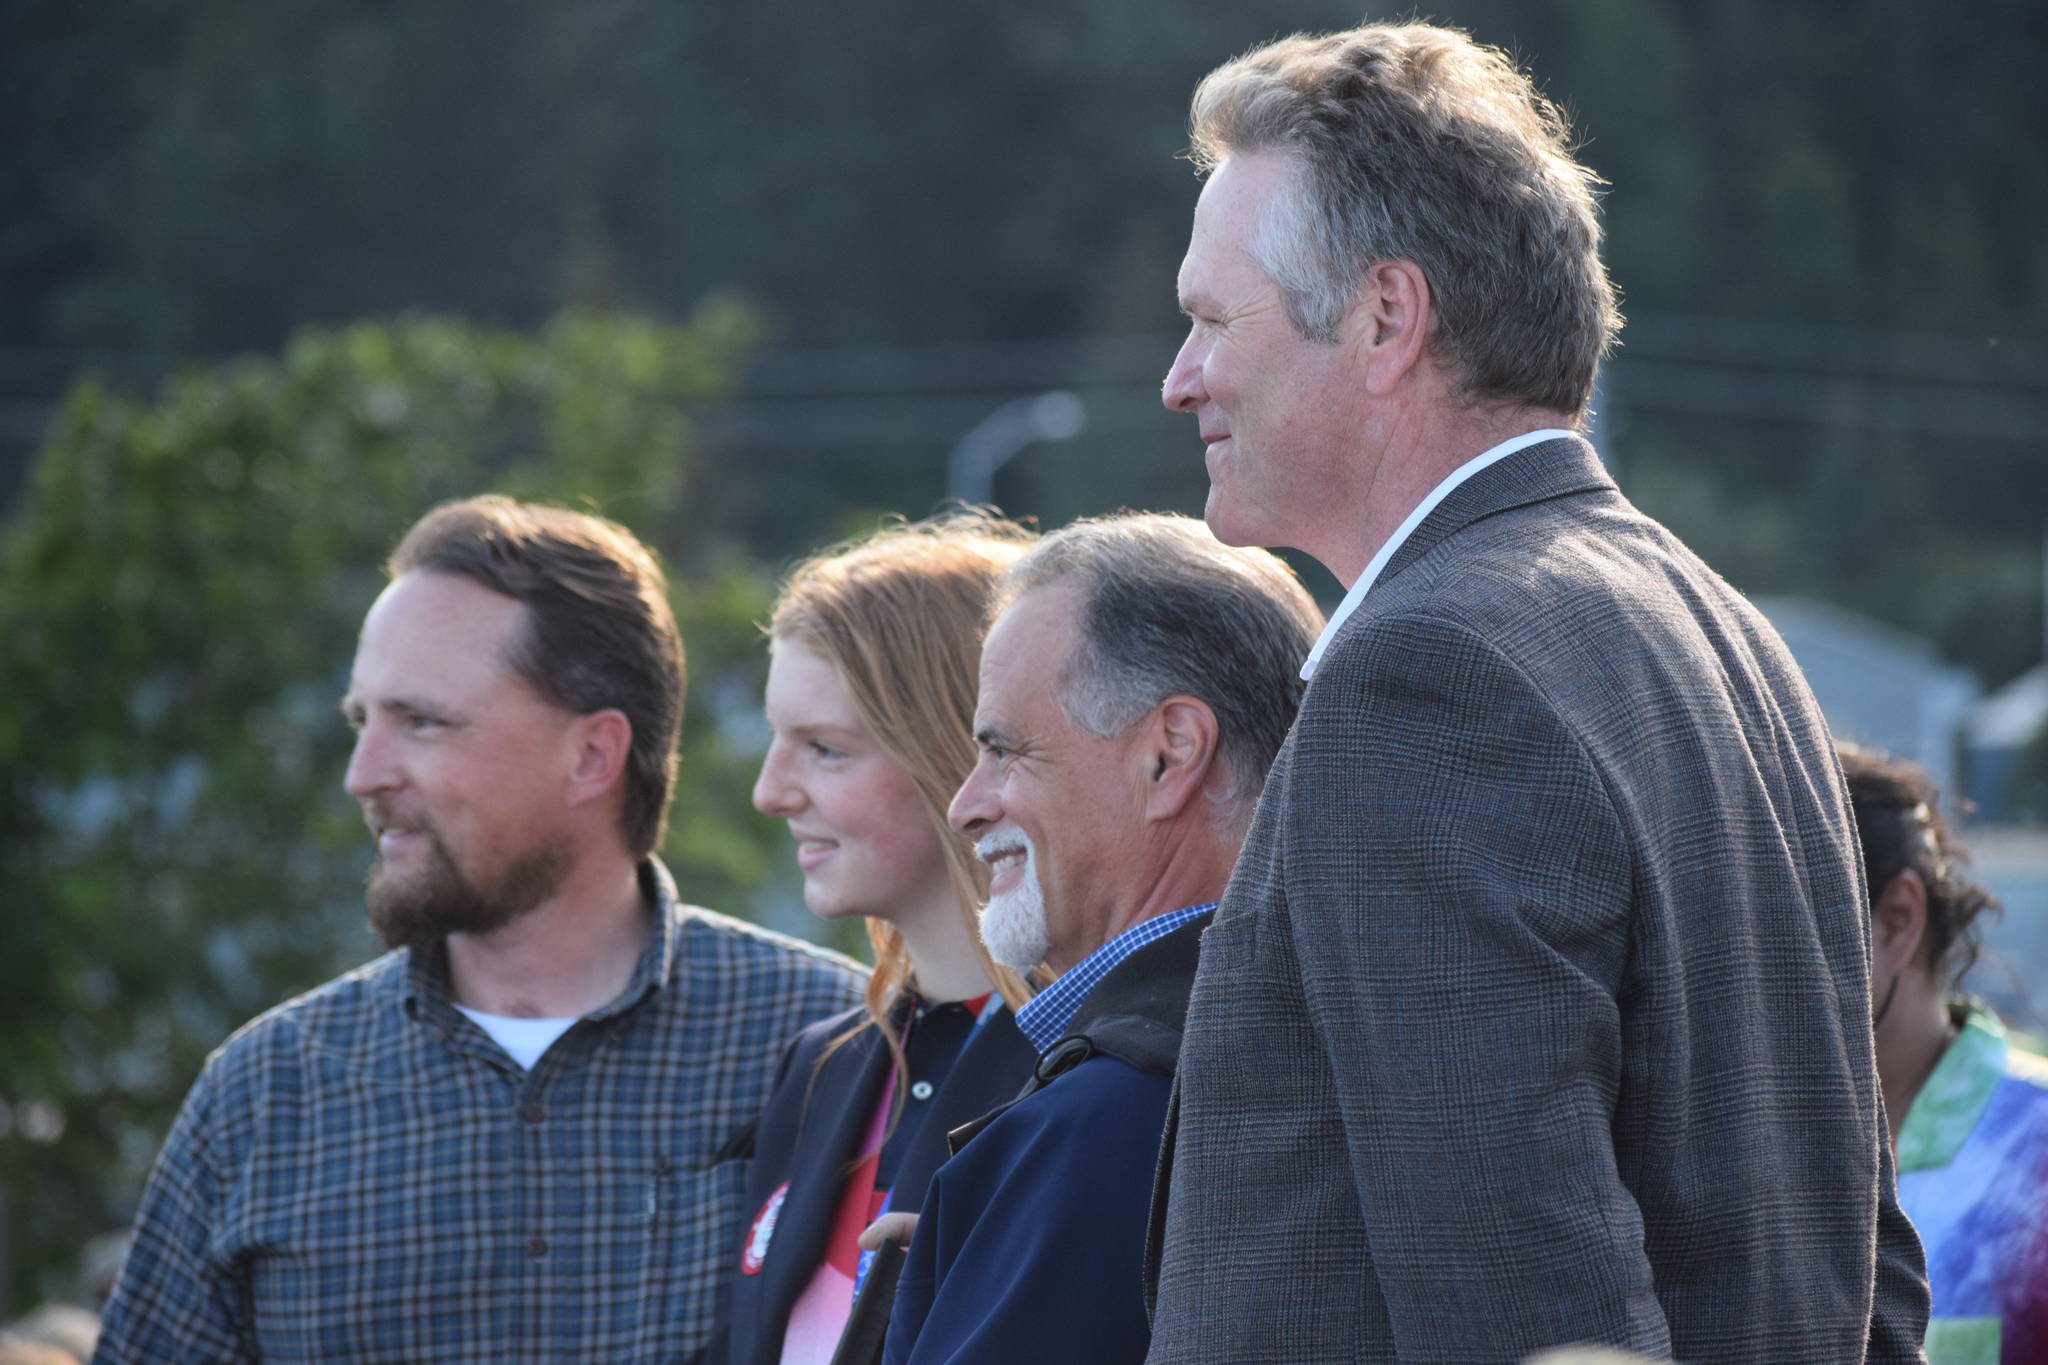 State Rep. Ben Carpenter (left), Lydia Jacoby (second from left), State Sen. Peter Micciche (second from right) and Gov. Mike Dunleavy (right) pose for a picture on Thursday, Aug. 5, 2021 in Seward, Alaska. (Ashlyn O'Hara/Peninsula Clarion)